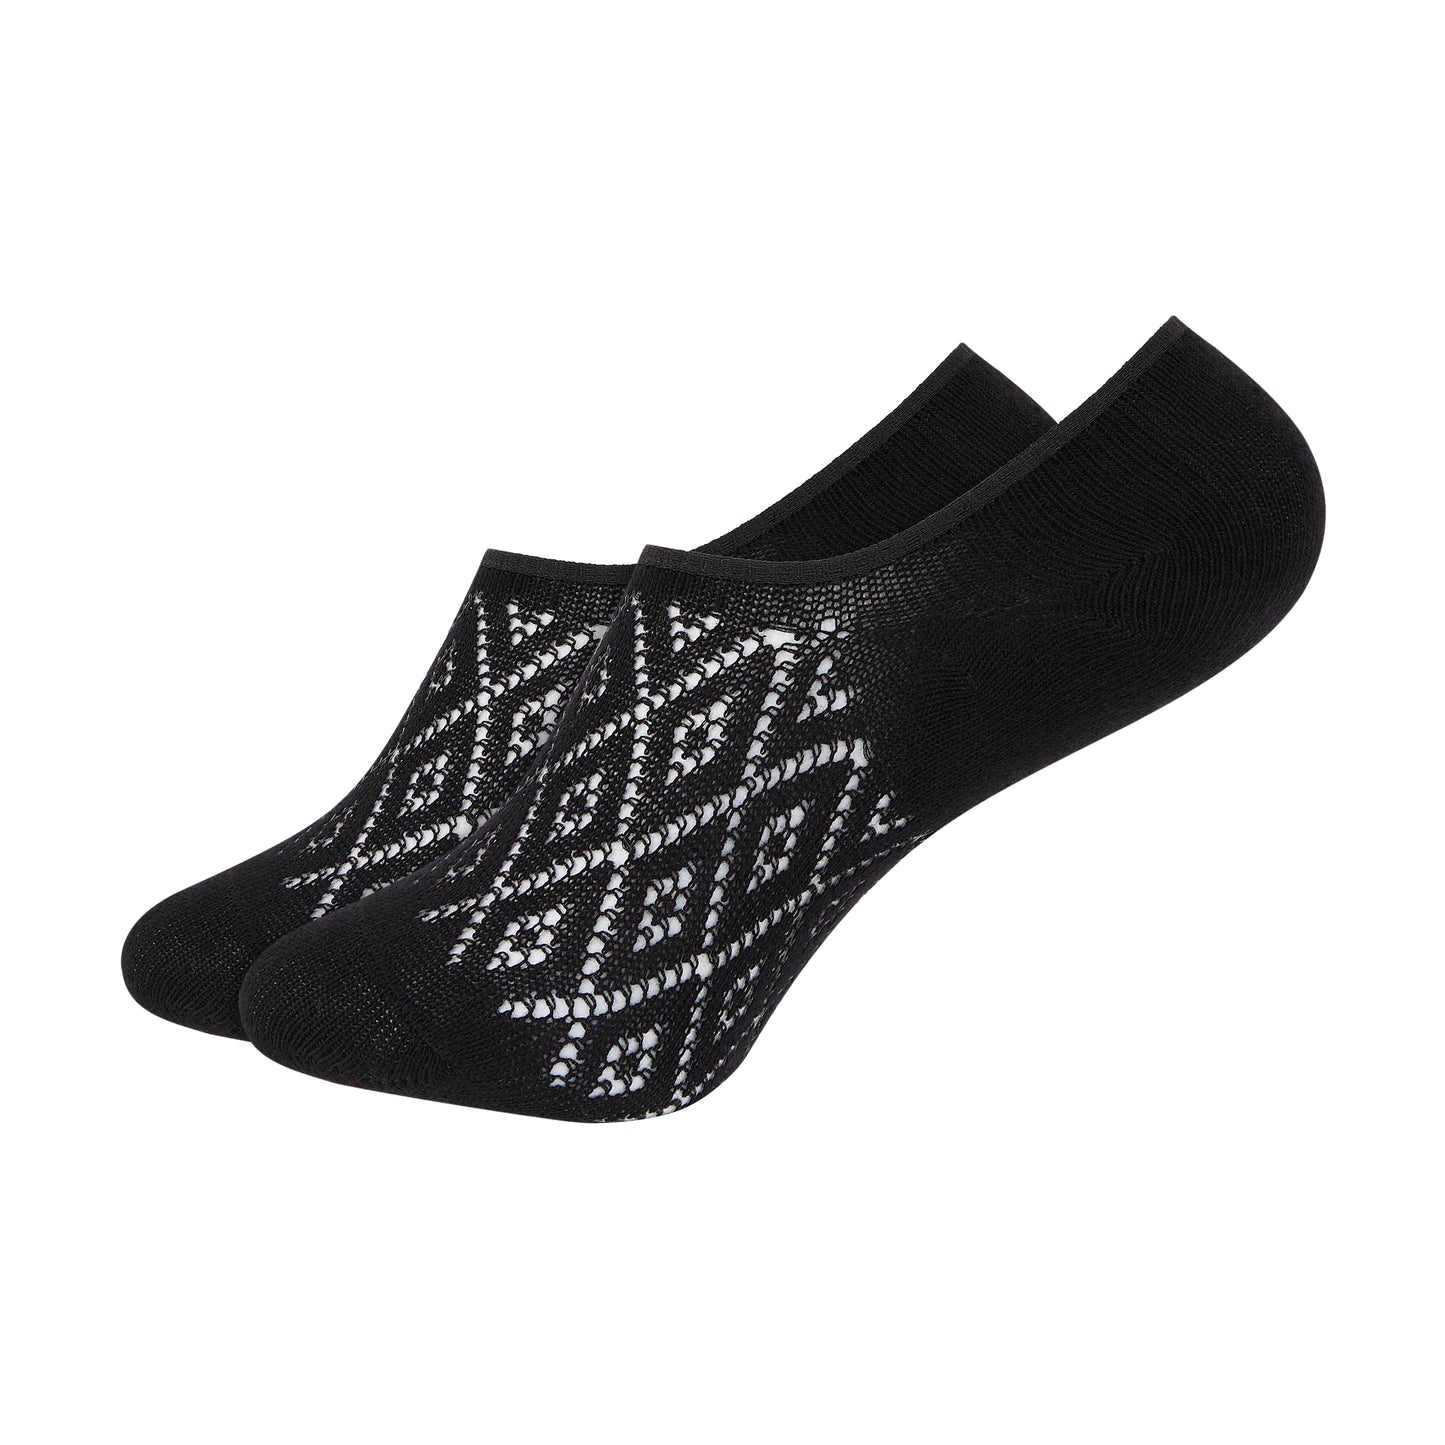 Women's Mesh Colored Invisible Foot Socks - IDENTITY Apparel Shop